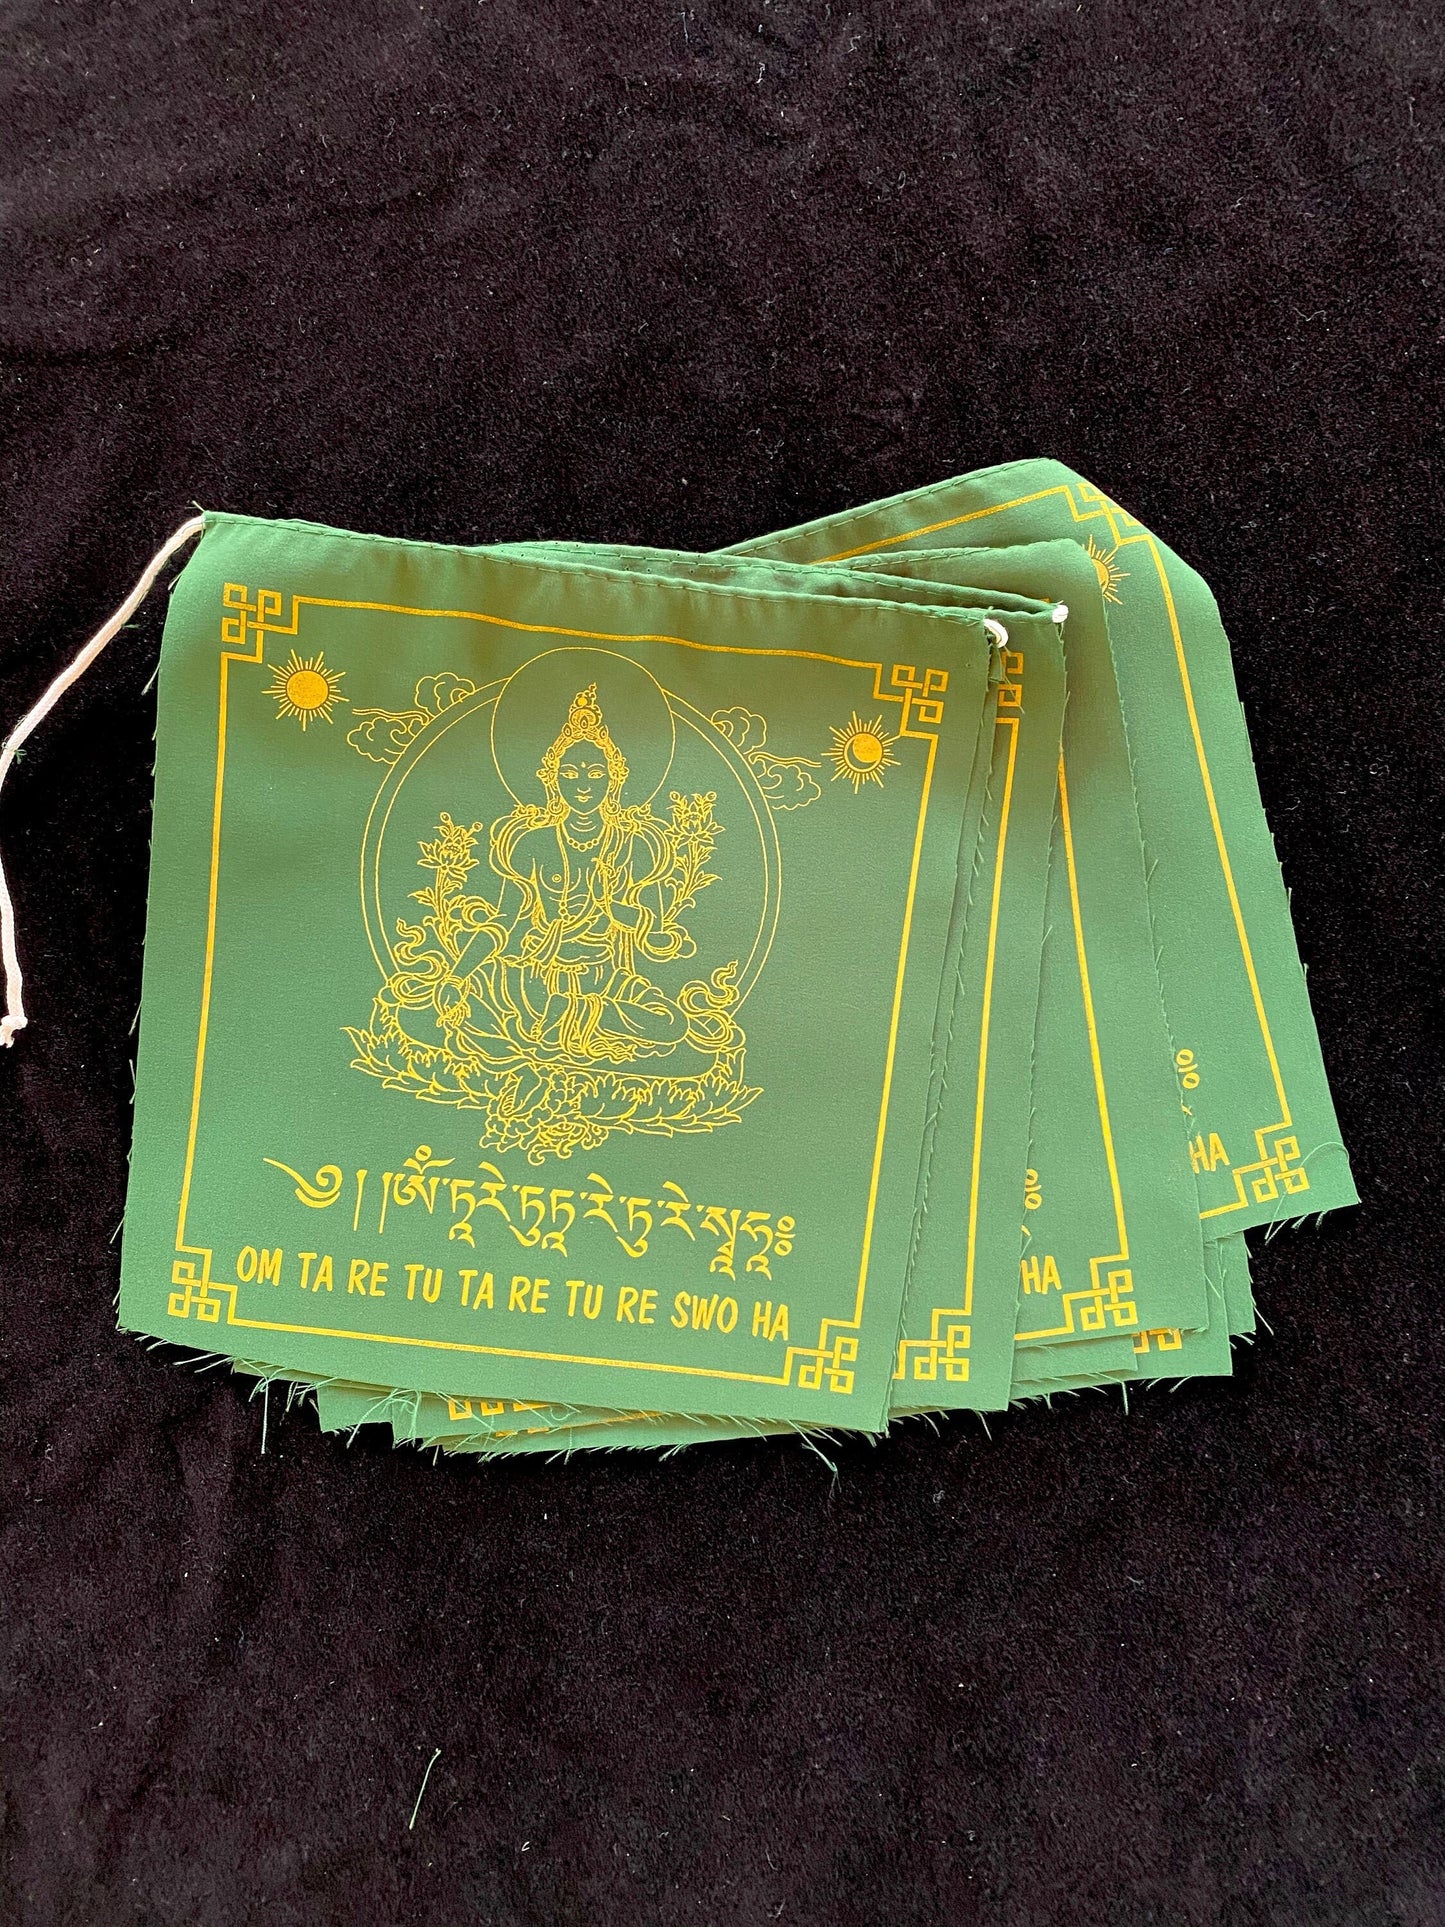 High-quality Tibetan prayer flags: Close-up of 4 Green Tara flag from a set of 10, 8x8 inches each, colored green, imprinted with her image in yellow ink.